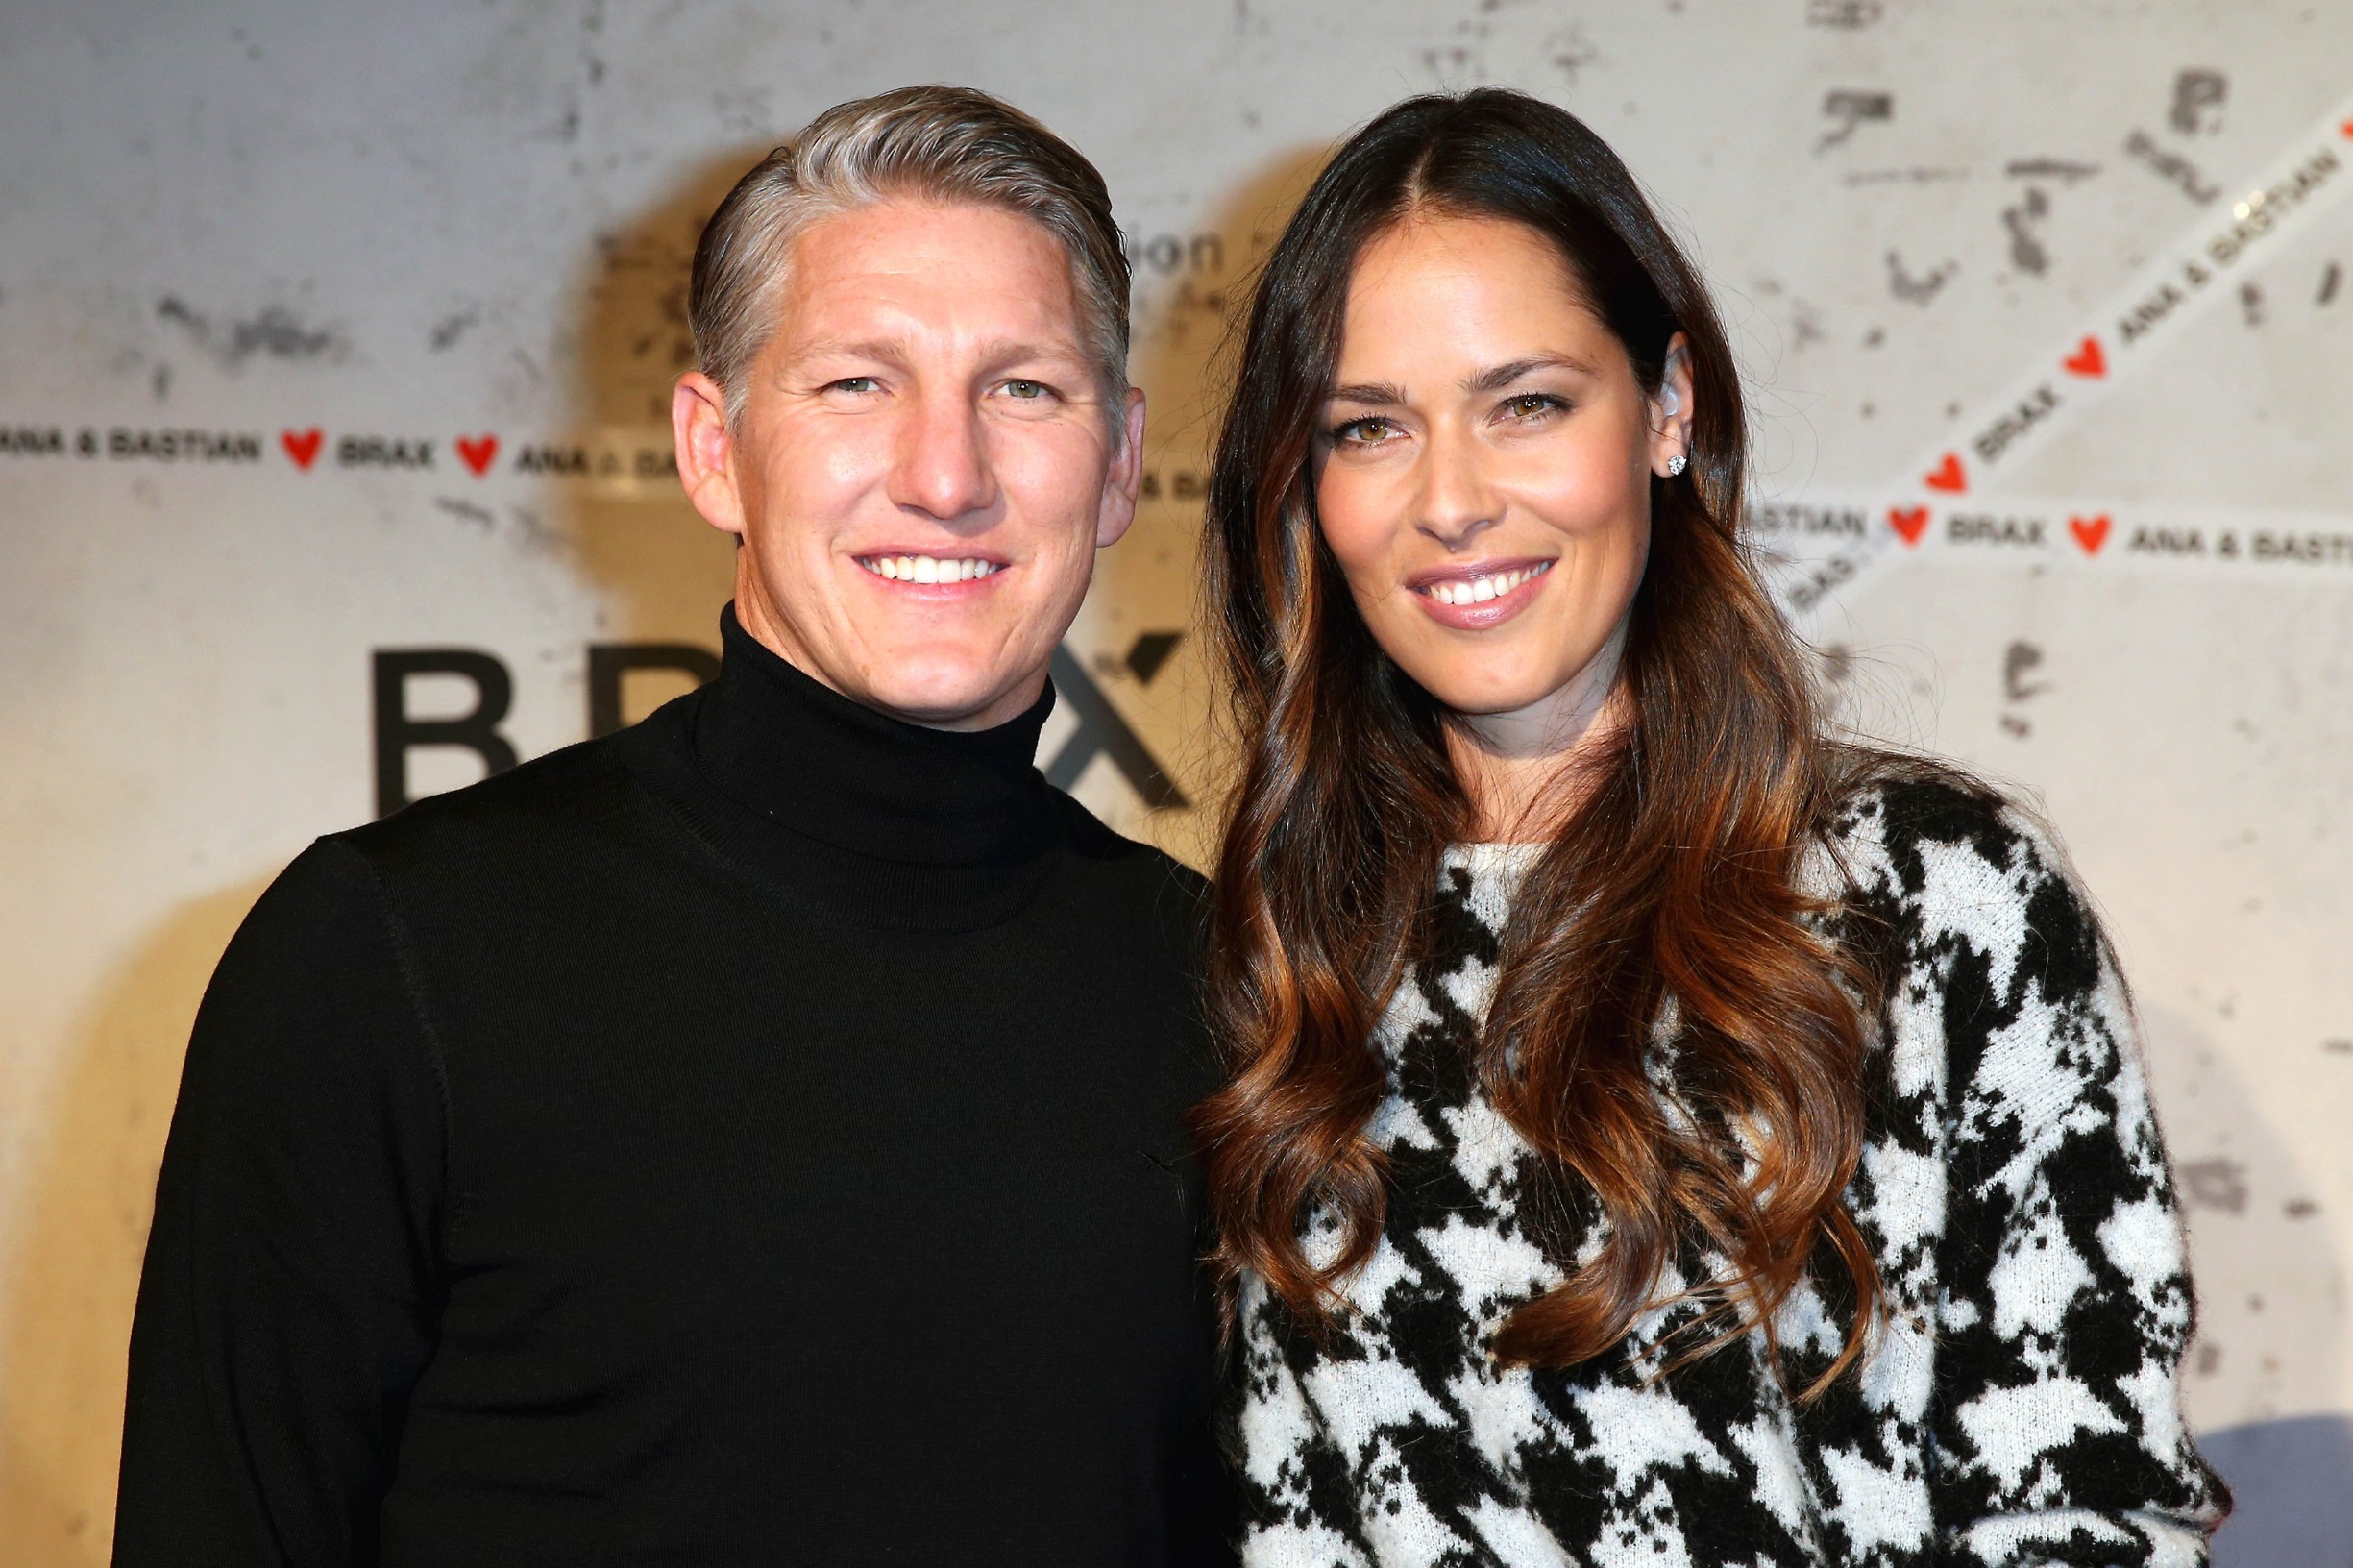 Ana Ivanovic and her husband Sebastian Schweinsteiger during the BRAX house party during Berlin Fashion Week Autumn/Winter 2020 at Fabrik 23 on January 14, 2020 in Berlin, Germany.

  (0), Image: 494148487, License: Rights-managed, Restrictions: UK, GERMANY and NEWSCOM OUT - Fee Payable Upon Reproduction - For queries contact Avalon.red - sales@avalon.red London: +44 (0) 20 7421 6000 Los Angeles: +1 (310) 822 0419 Berlin: +49 (0) 30 76 212 251, Model Release: no, Credit line: Famous/Avalon / Avalon Editorial / Profimedia